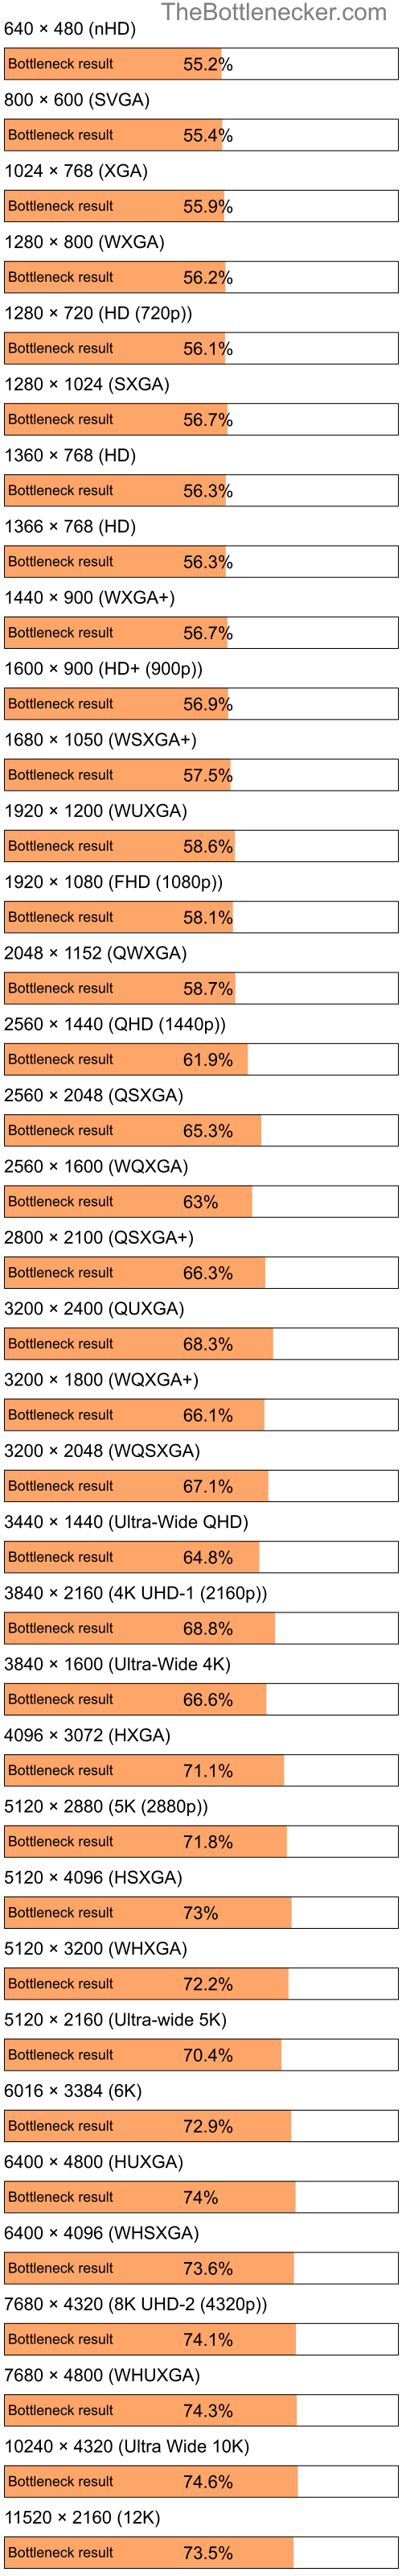 Bottleneck results by resolution for Intel Pentium 4 and AMD FirePro 2260 in General Tasks